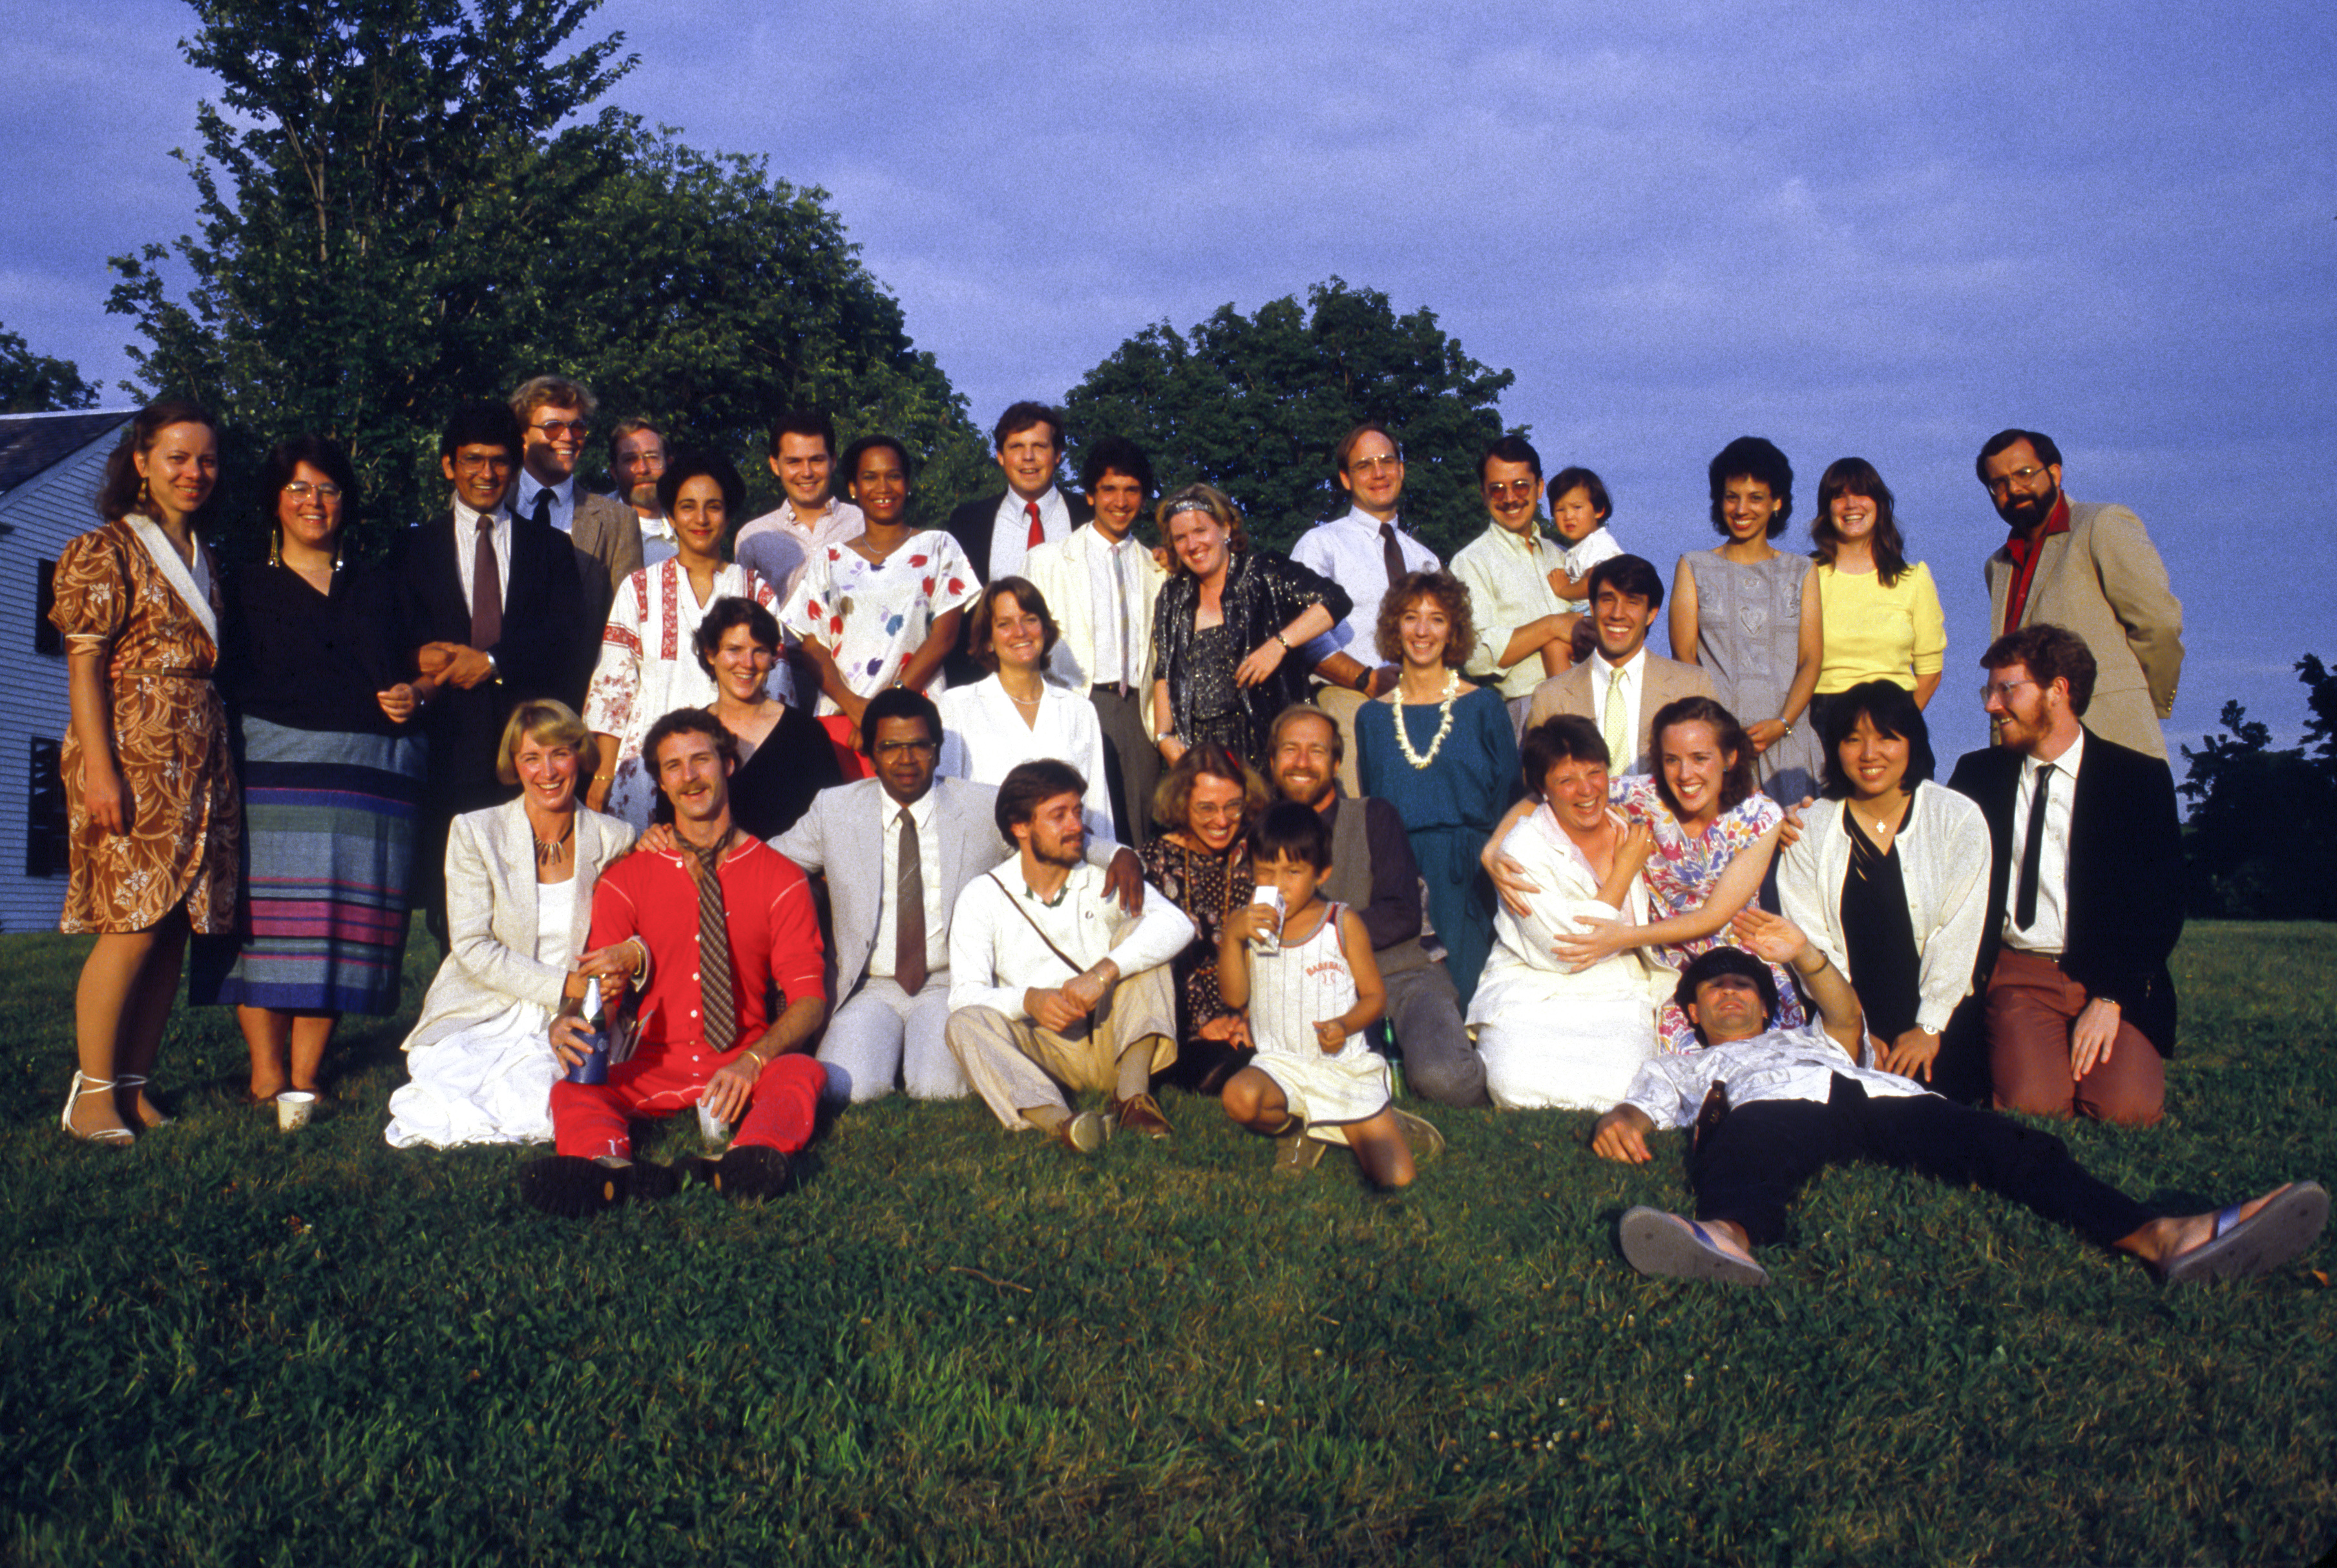 A large group of people pose for a photo on a green lawn.